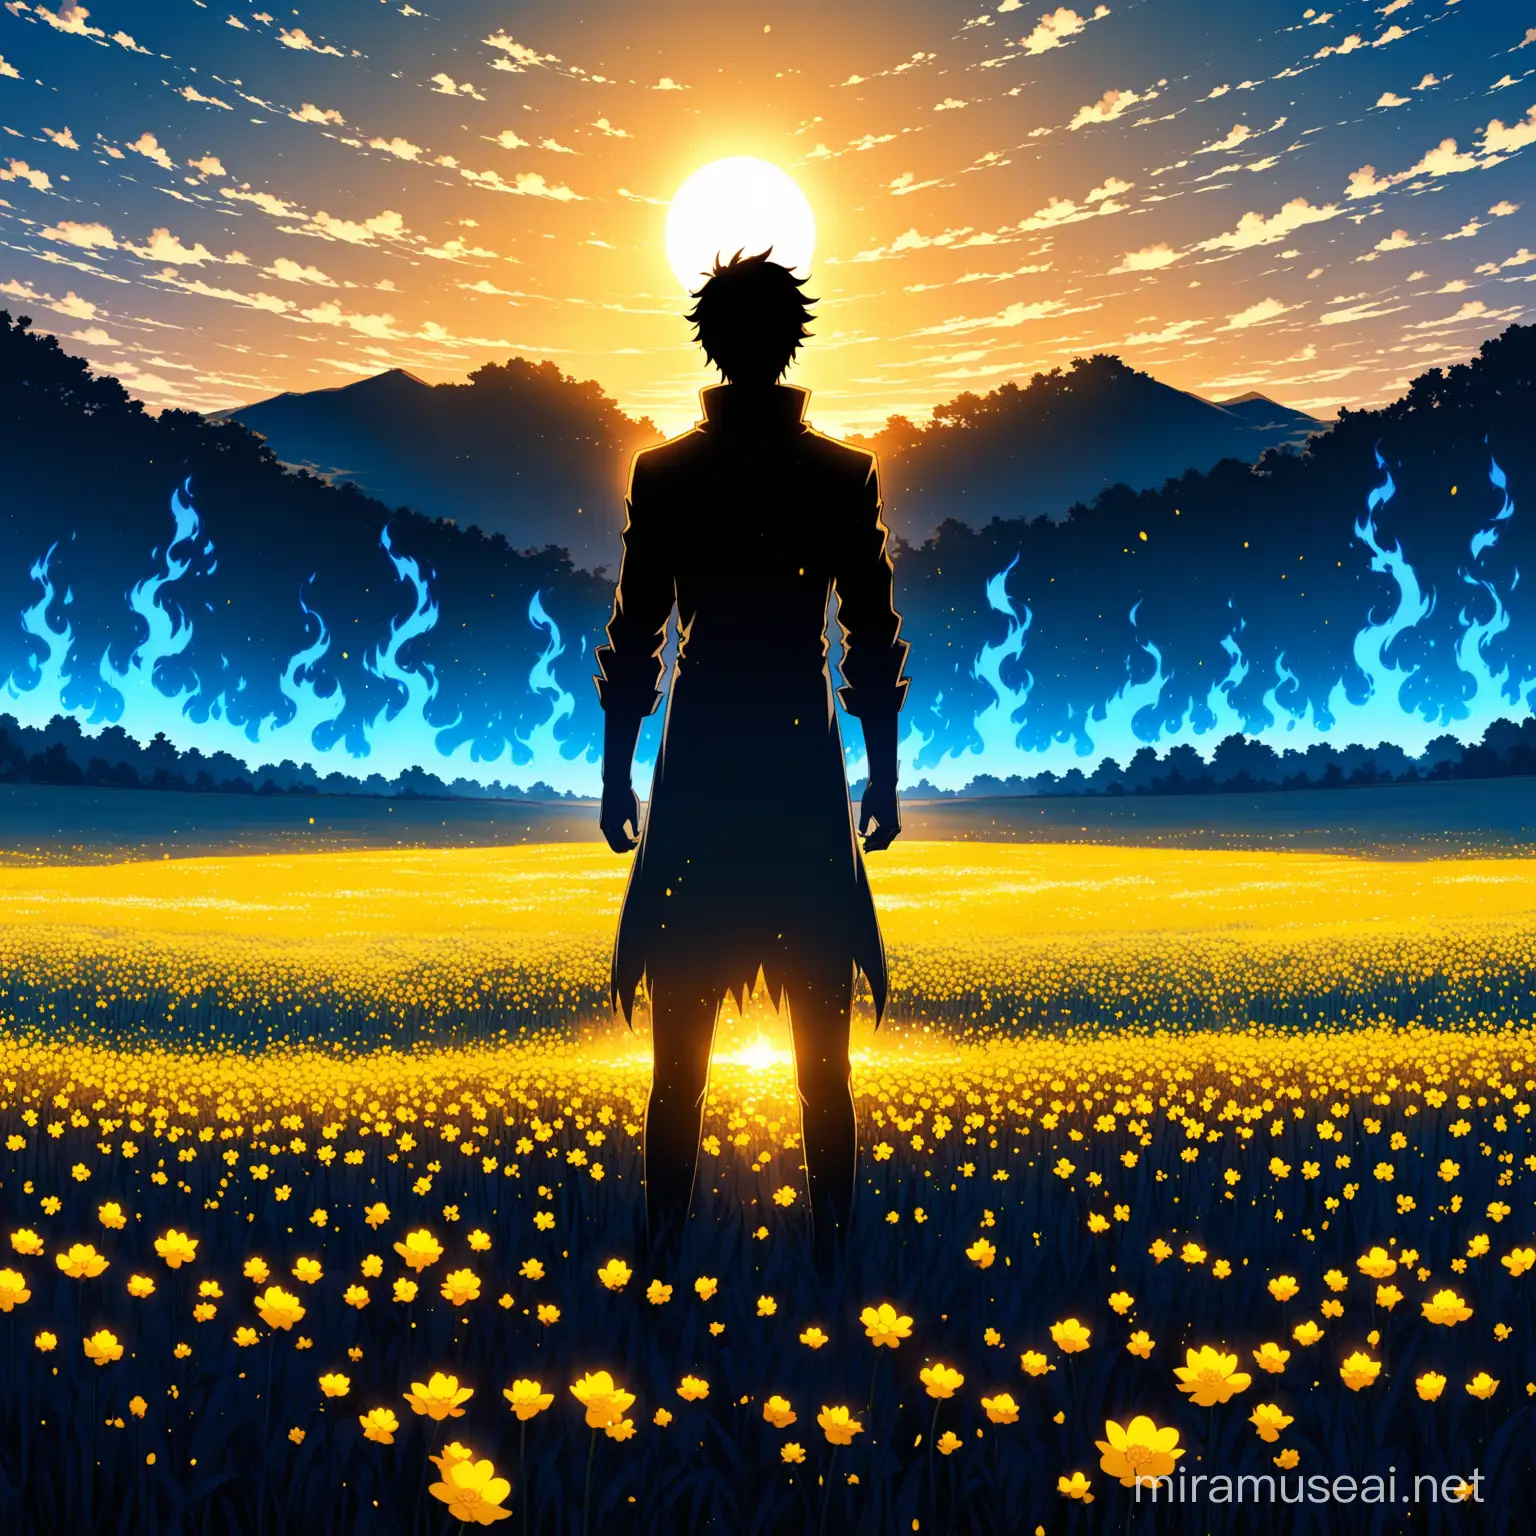 Anime Style Male Figure Standing in Burning Flower Field at Sunrise